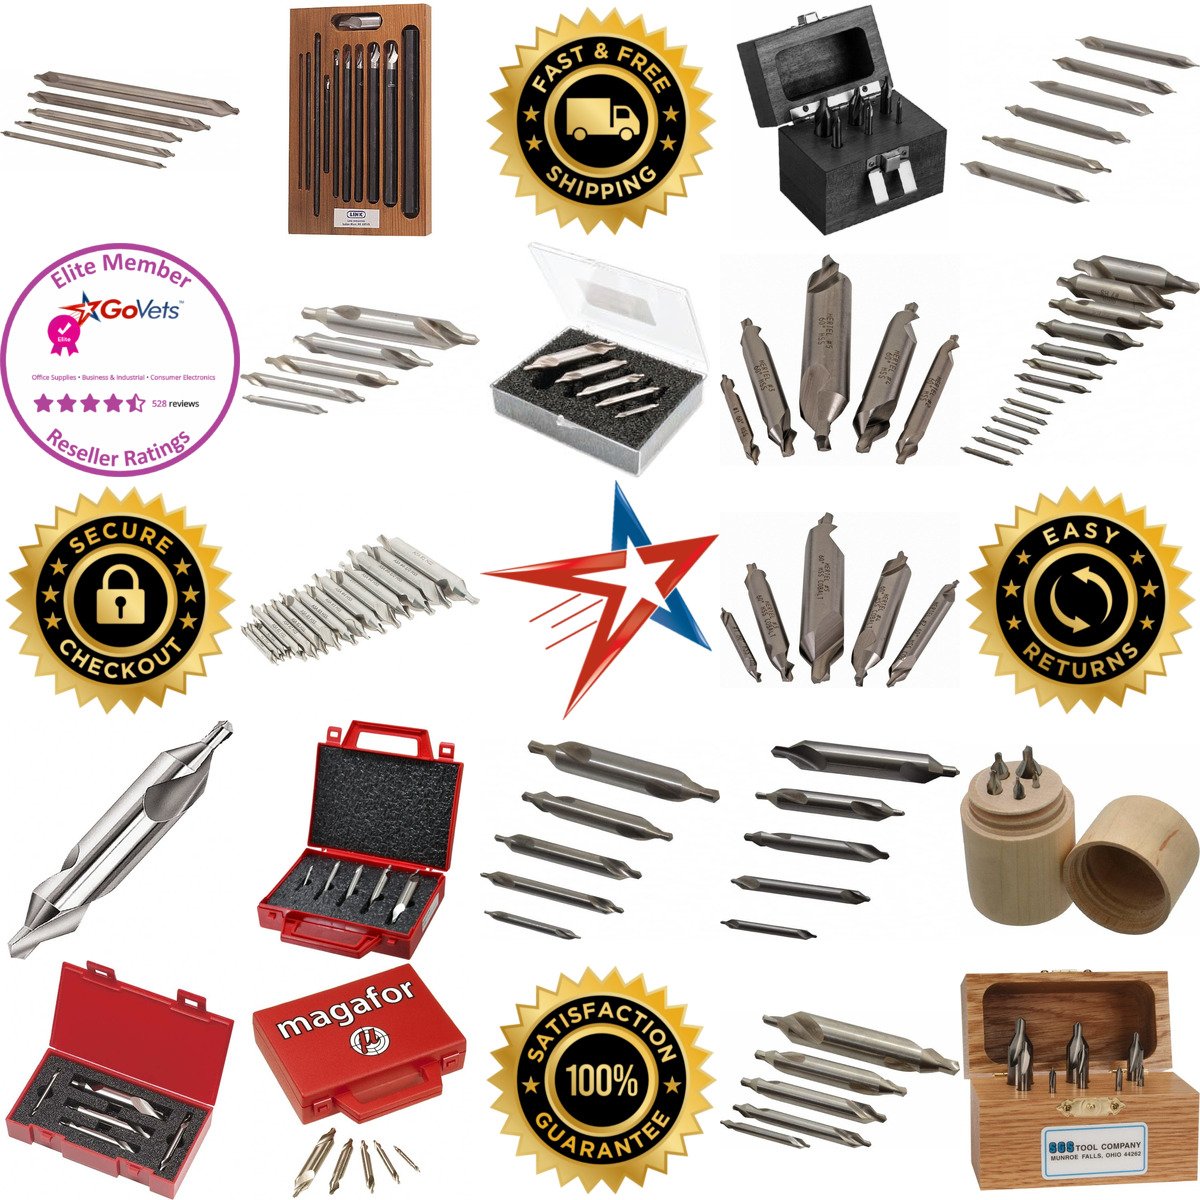 A selection of Combination Drill and Countersink Sets products on GoVets